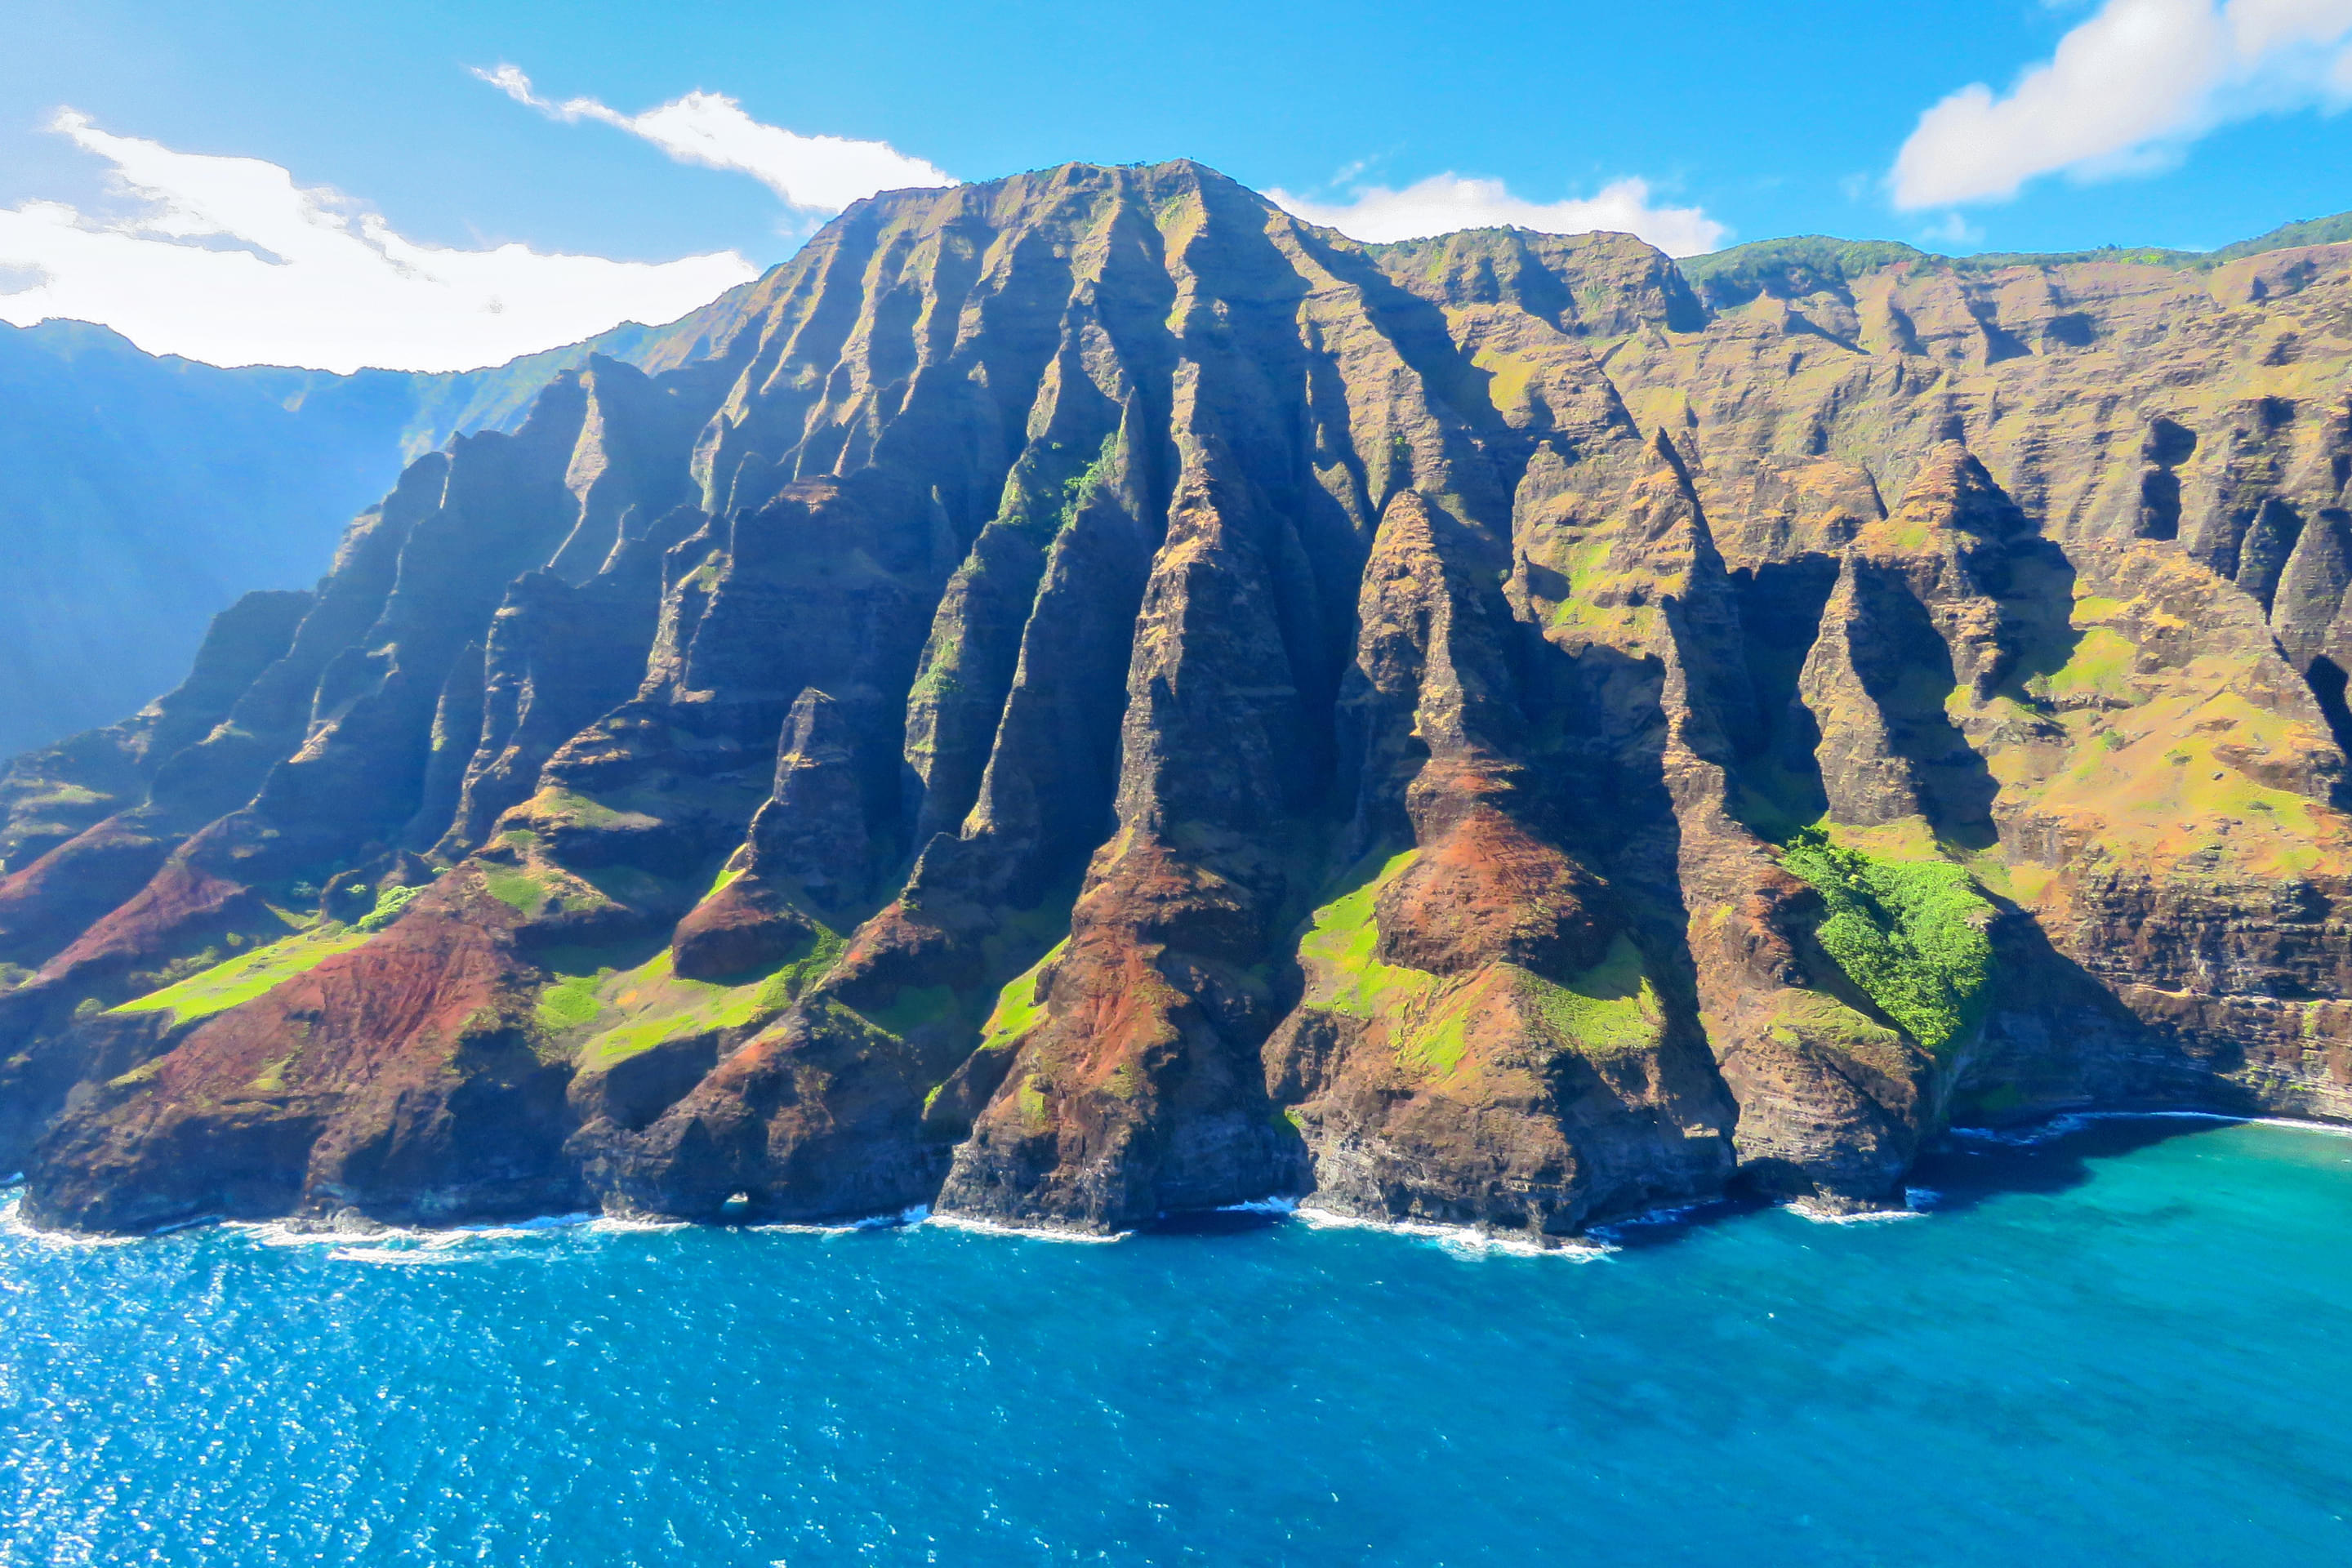 Na Pali Coast State Wilderness Park Overview